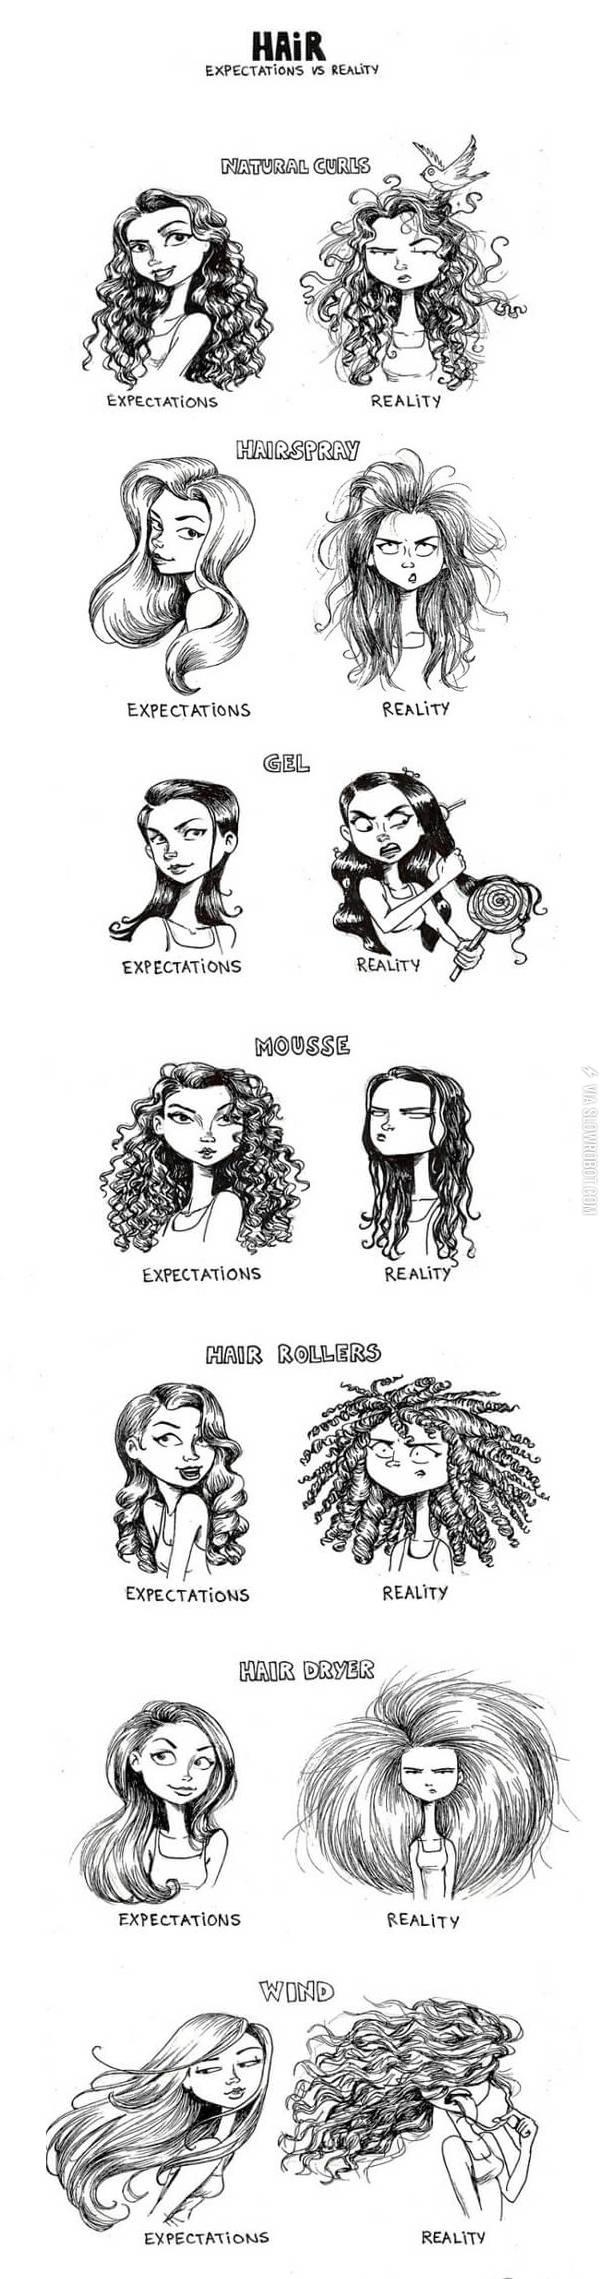 Womens+Hair%3A+Expectations+Vs+Reality